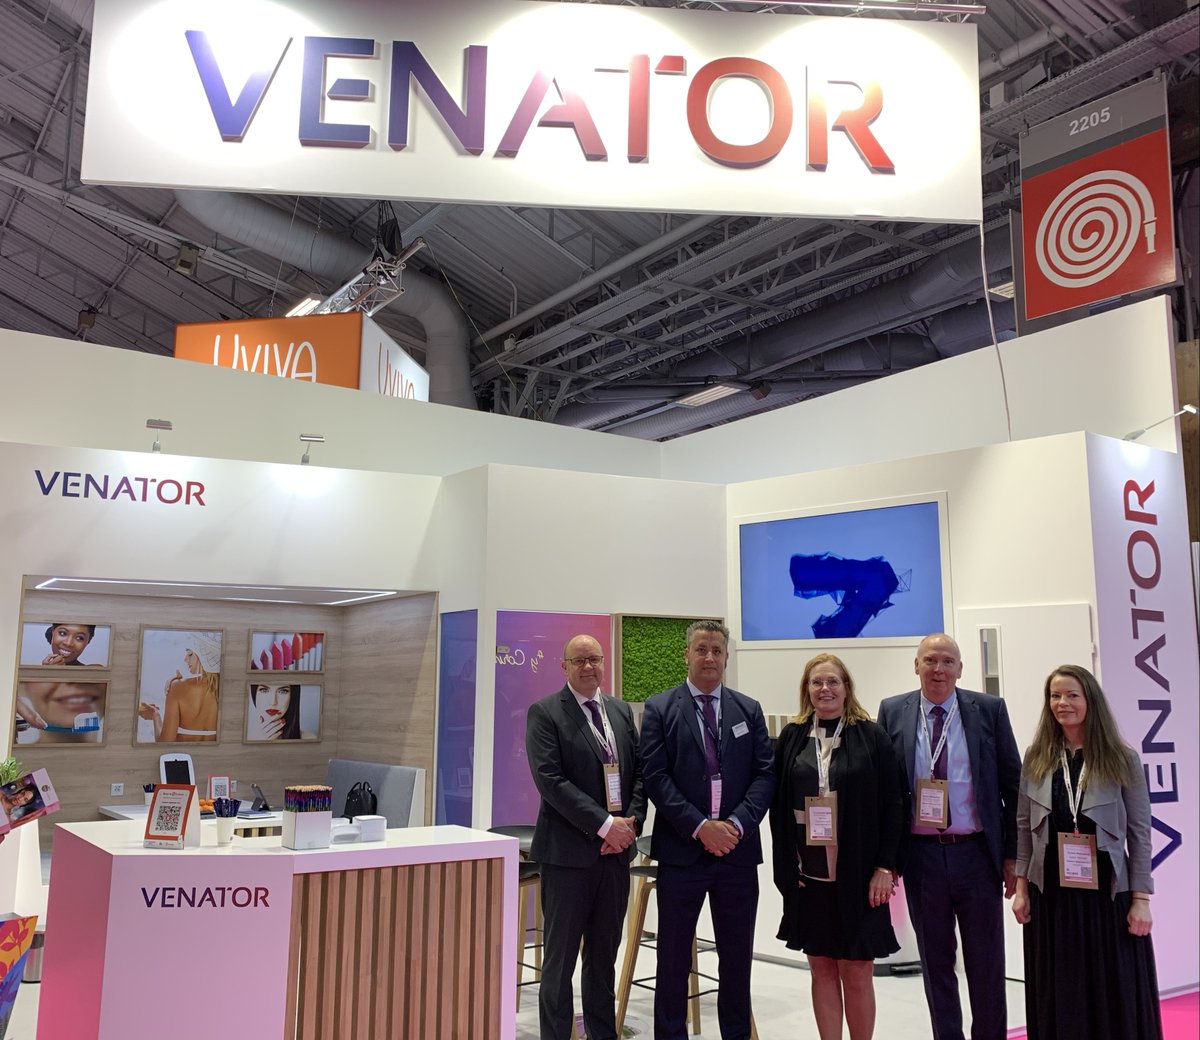 Day one at in-cosmetics Global is here! If you’re attending the event, pop to Hall 2, stand 2F45 to chat with our #VenatorExperts and find out how we’re the sustainable provider of choice for cosmetics ingredients. #incosglobal #tradeshow #cosmeticsindustry #innovation